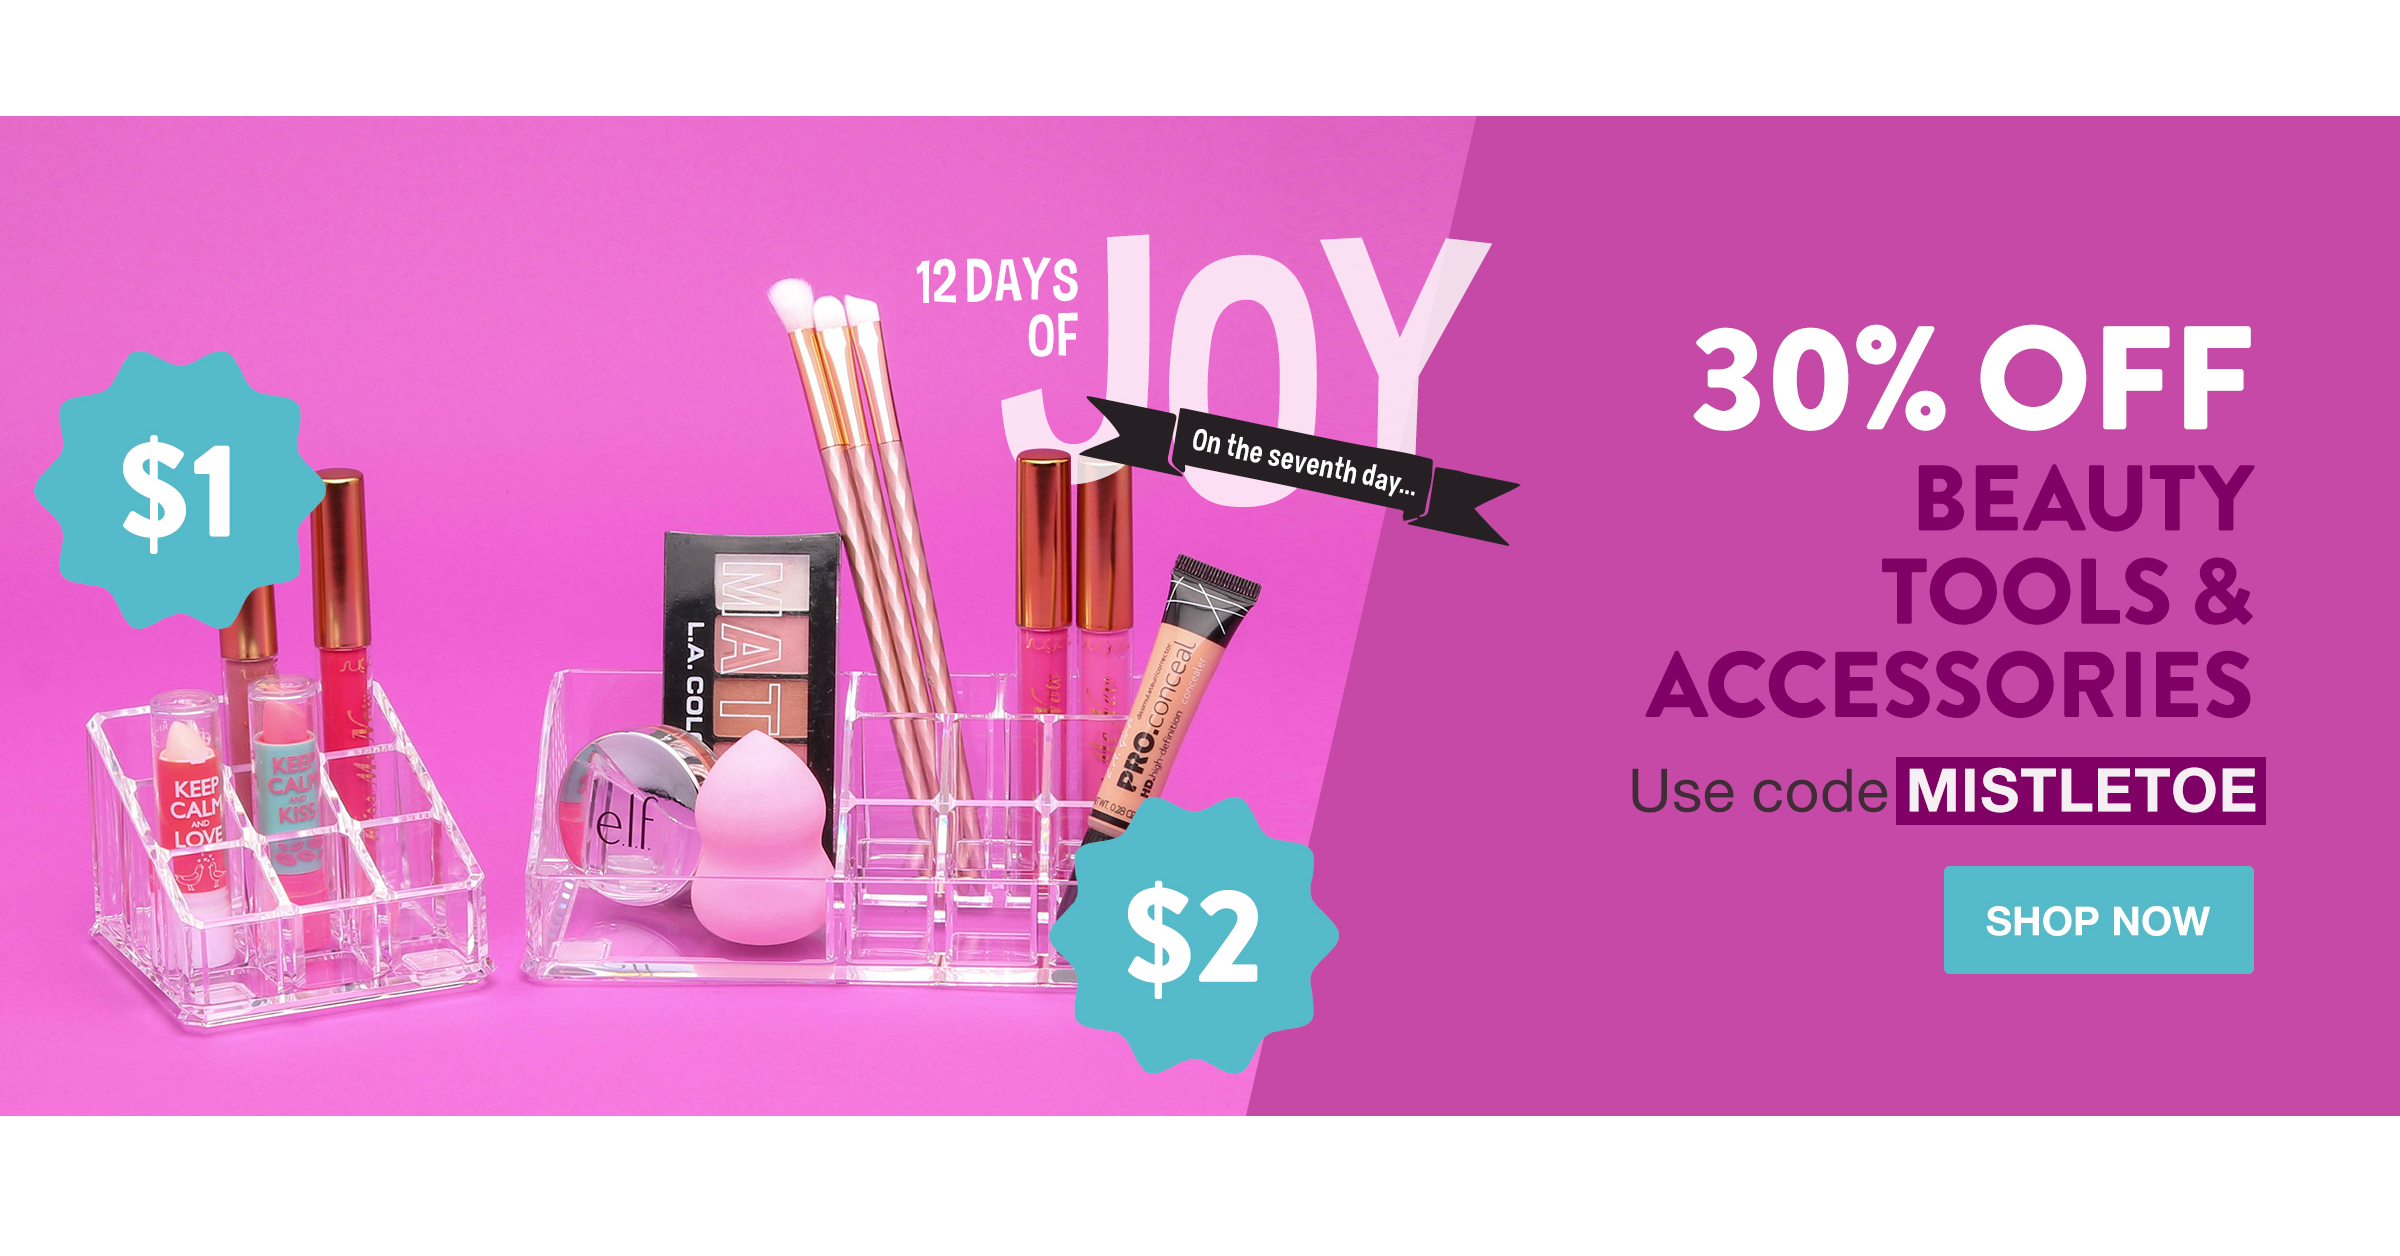 HOT! Save an Extra 30% Off Beauty Tools & Accessories at Hollar!